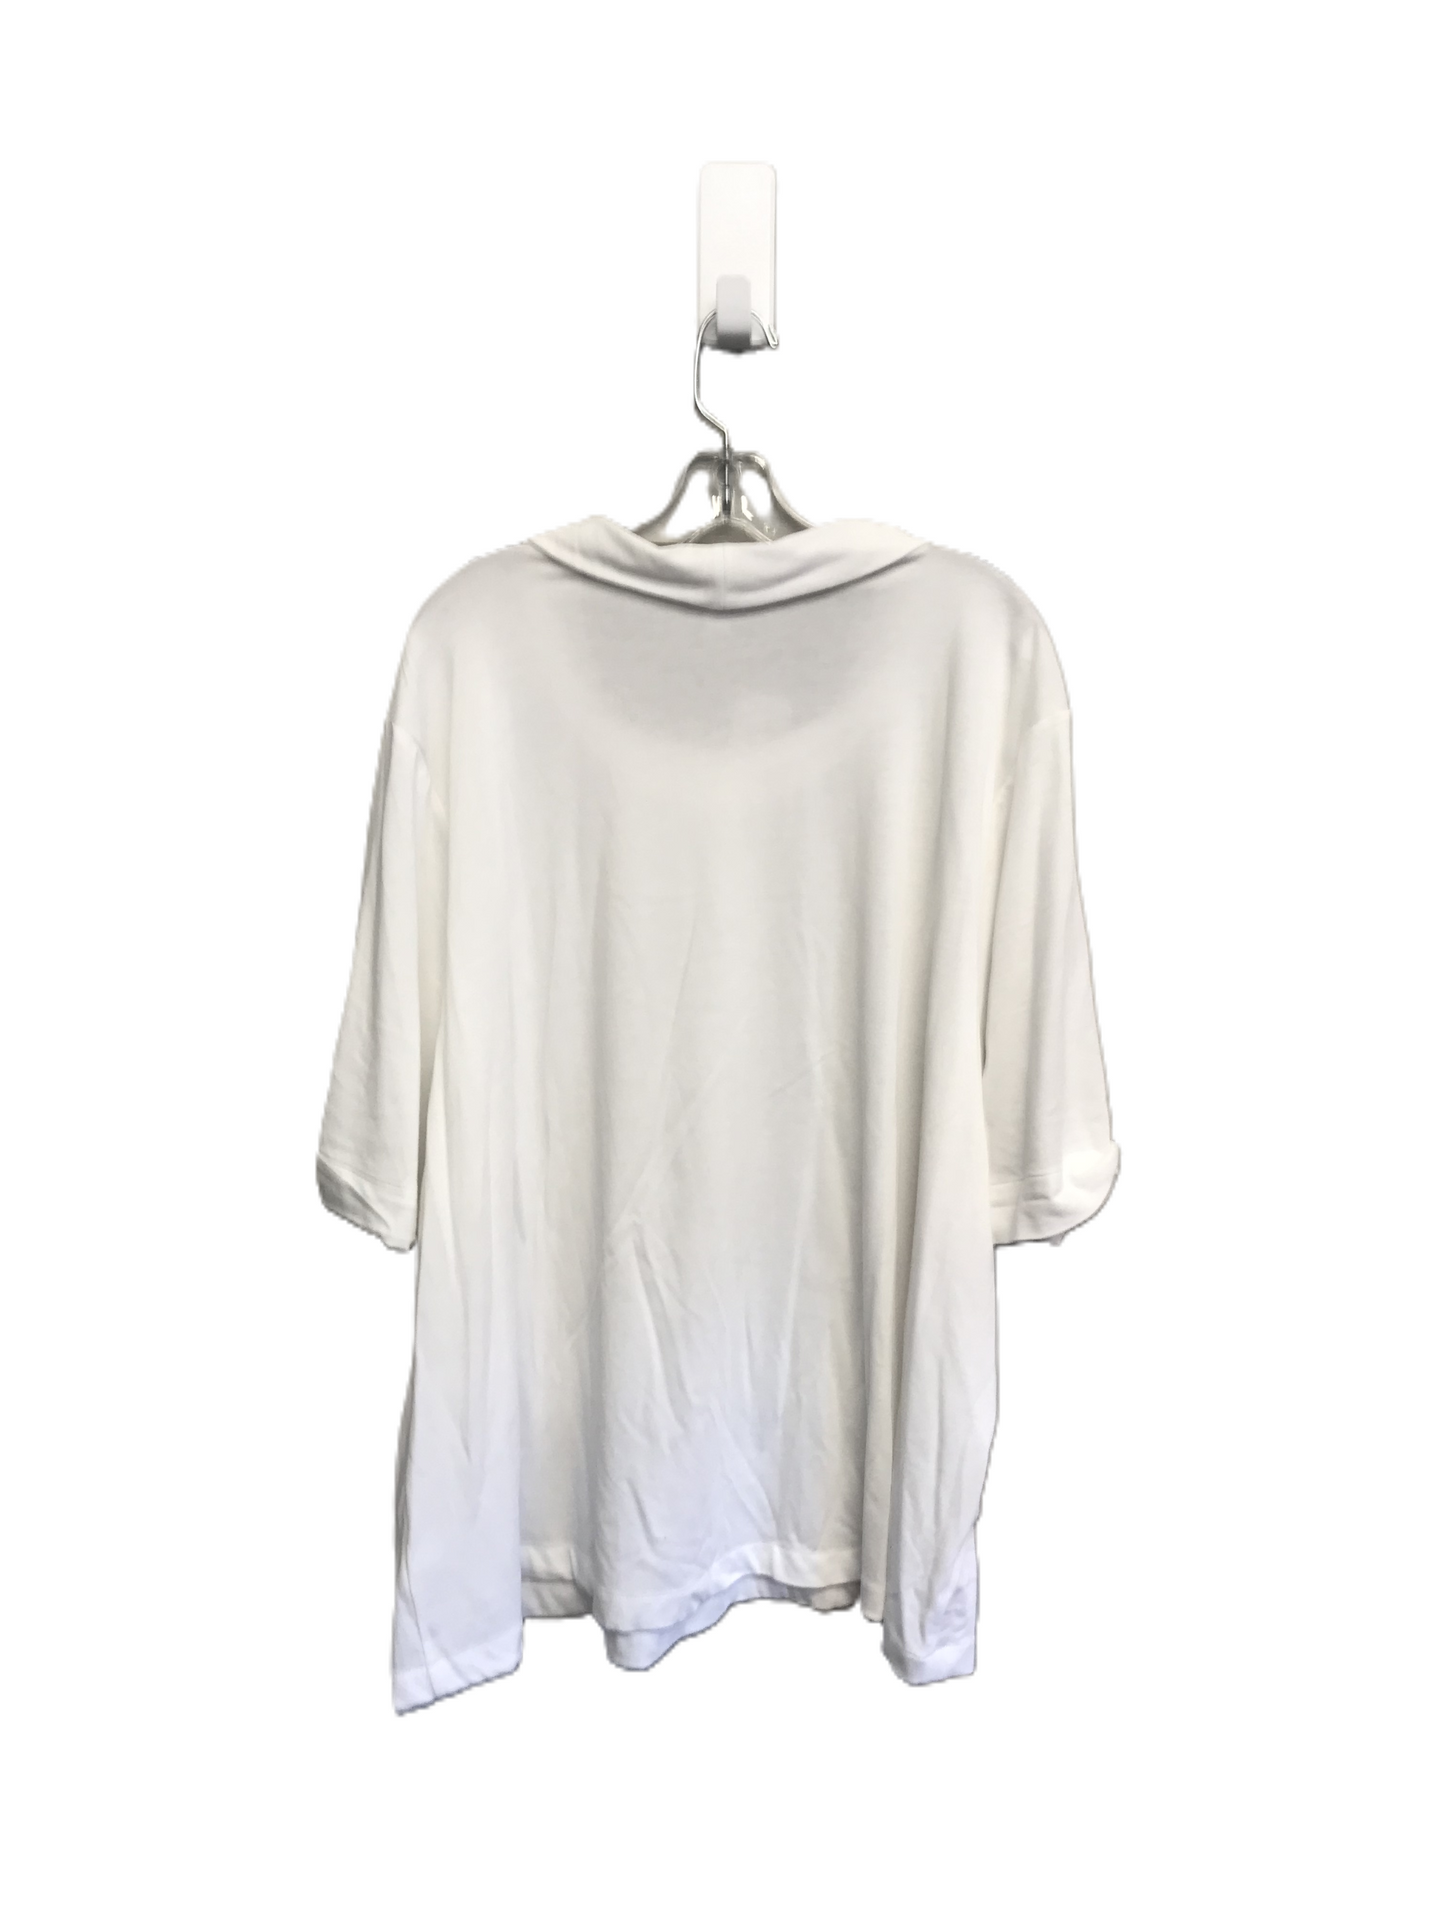 White Top Short Sleeve Basic By Pure Jill, Size: 4x